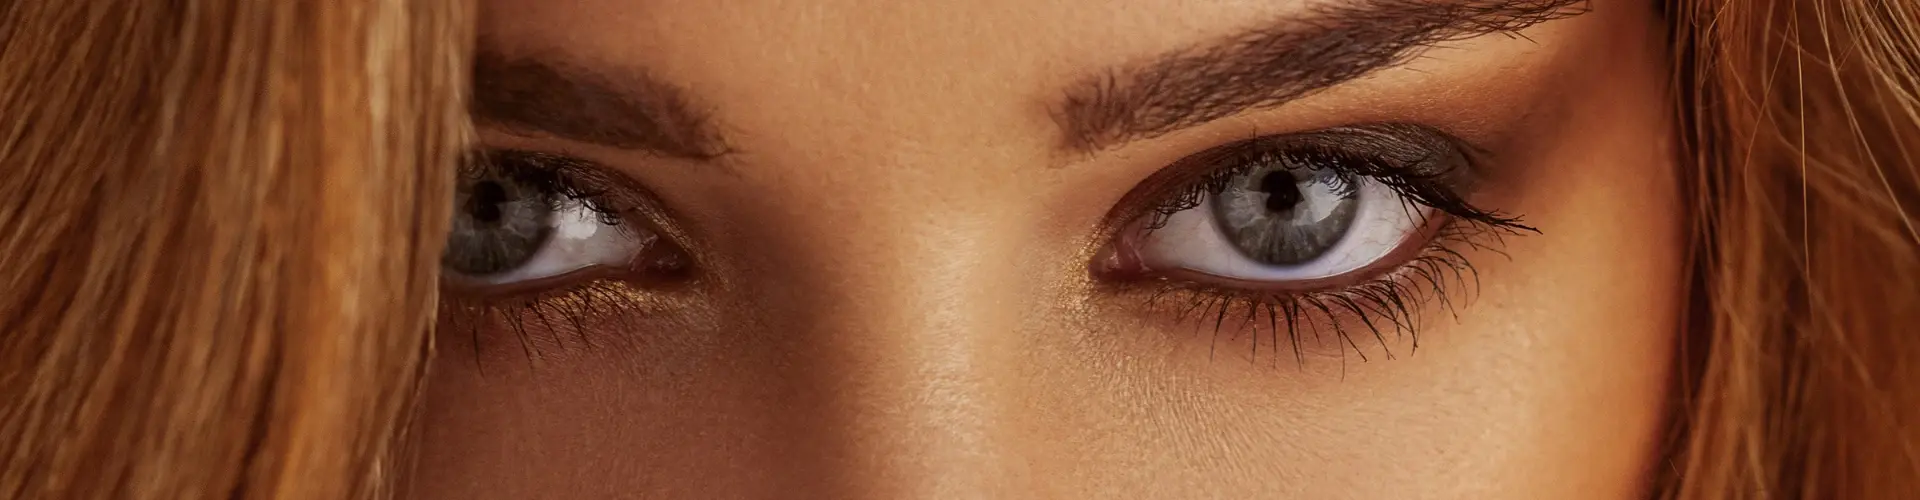 A close up of a woman's eyes.